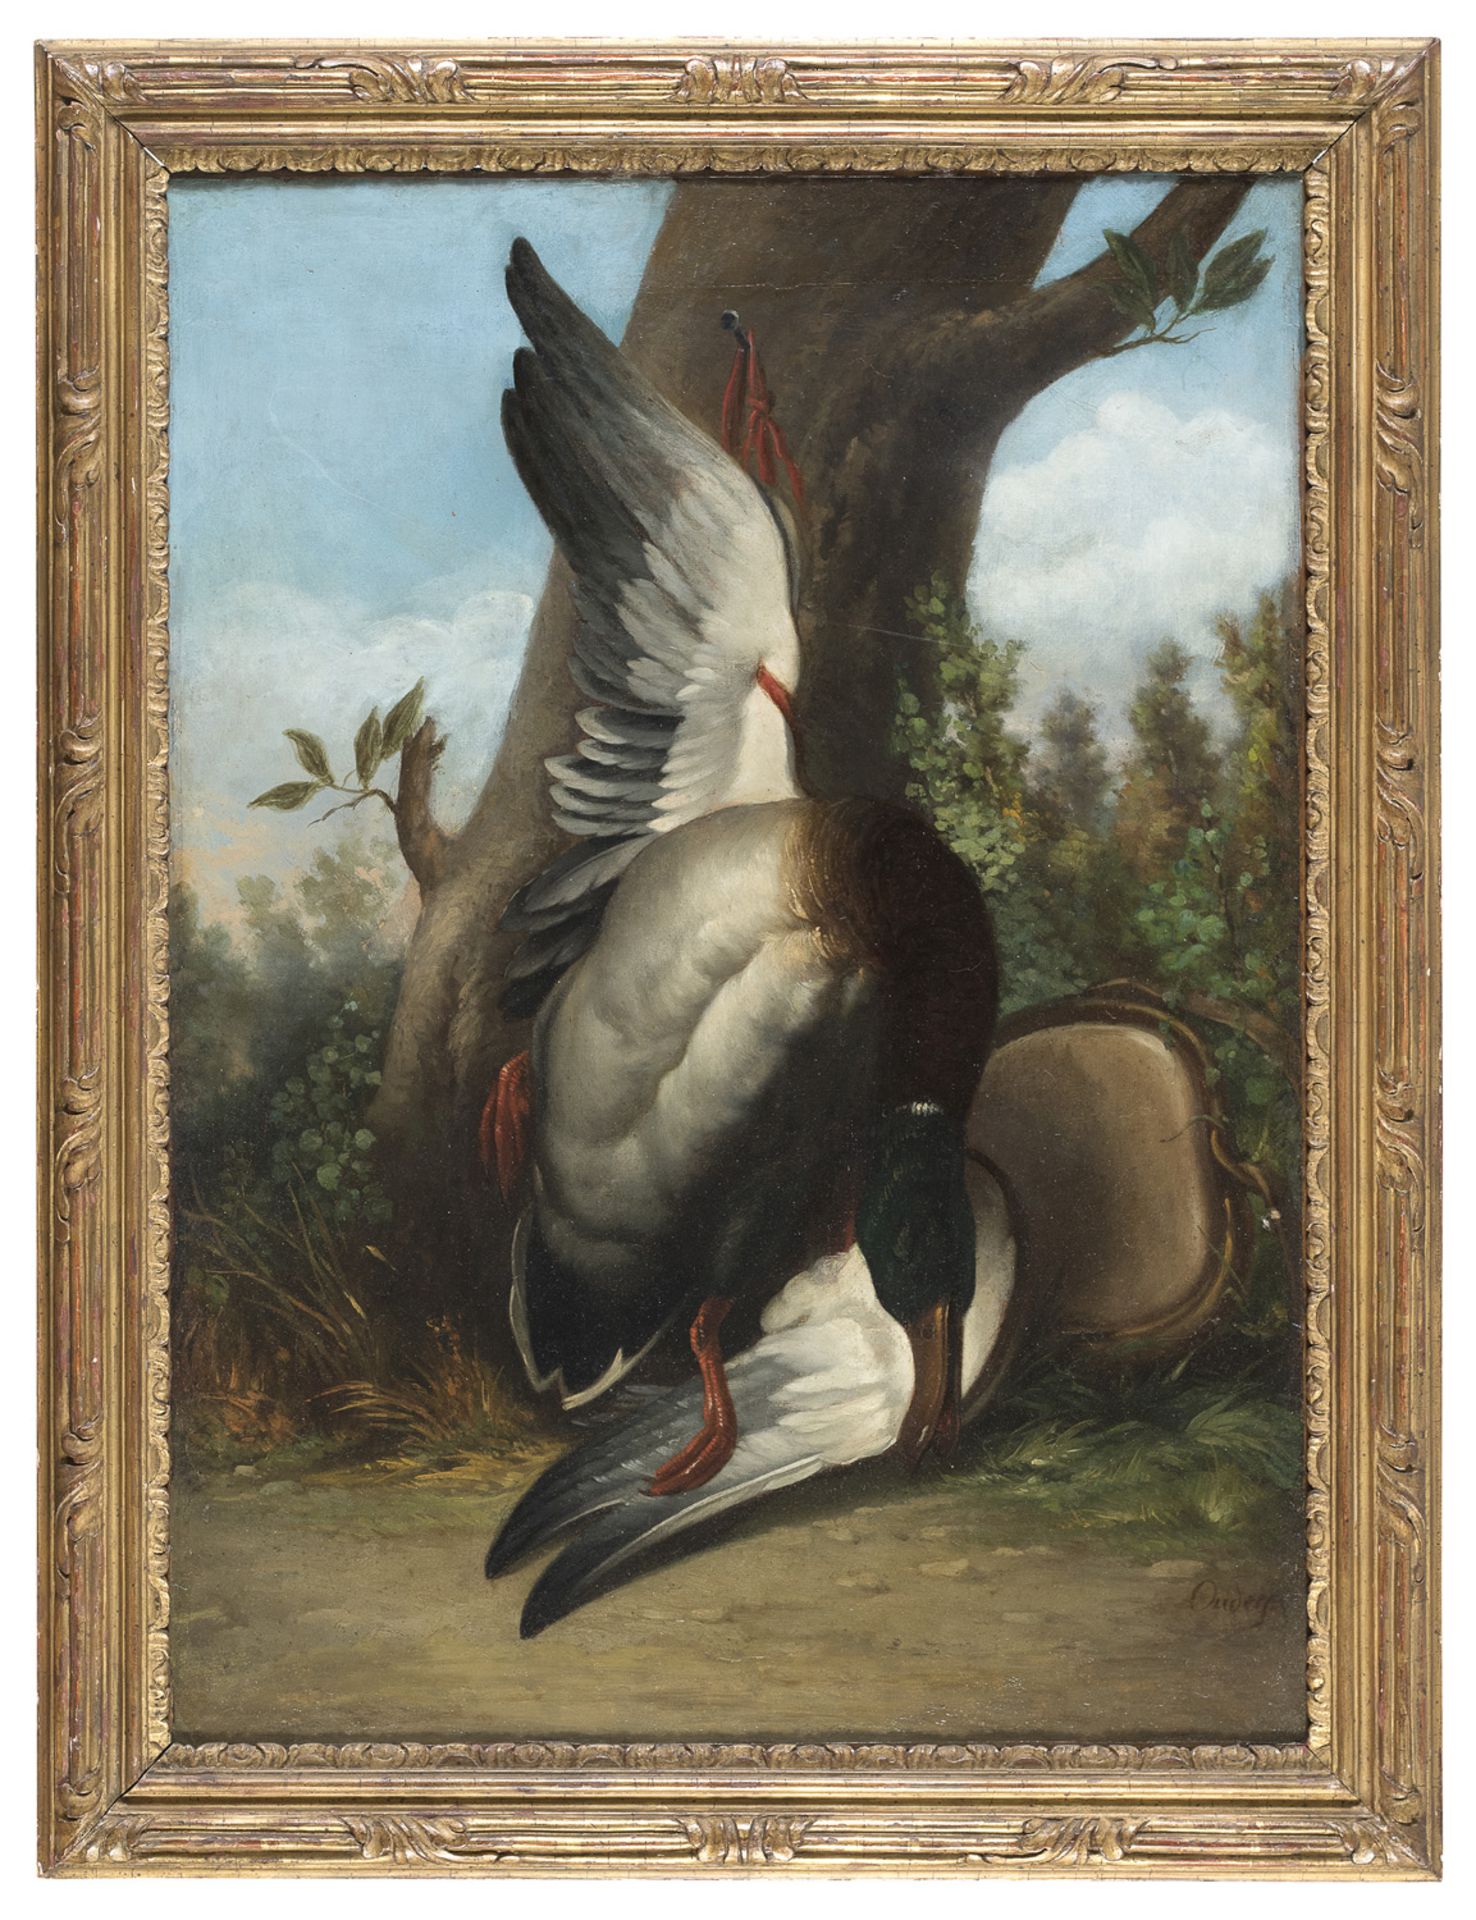 PAIR OF OF PAINTINGS WITH HUNTING SCENES BY CHARLES OUDRY (1720-1778) - Image 2 of 2